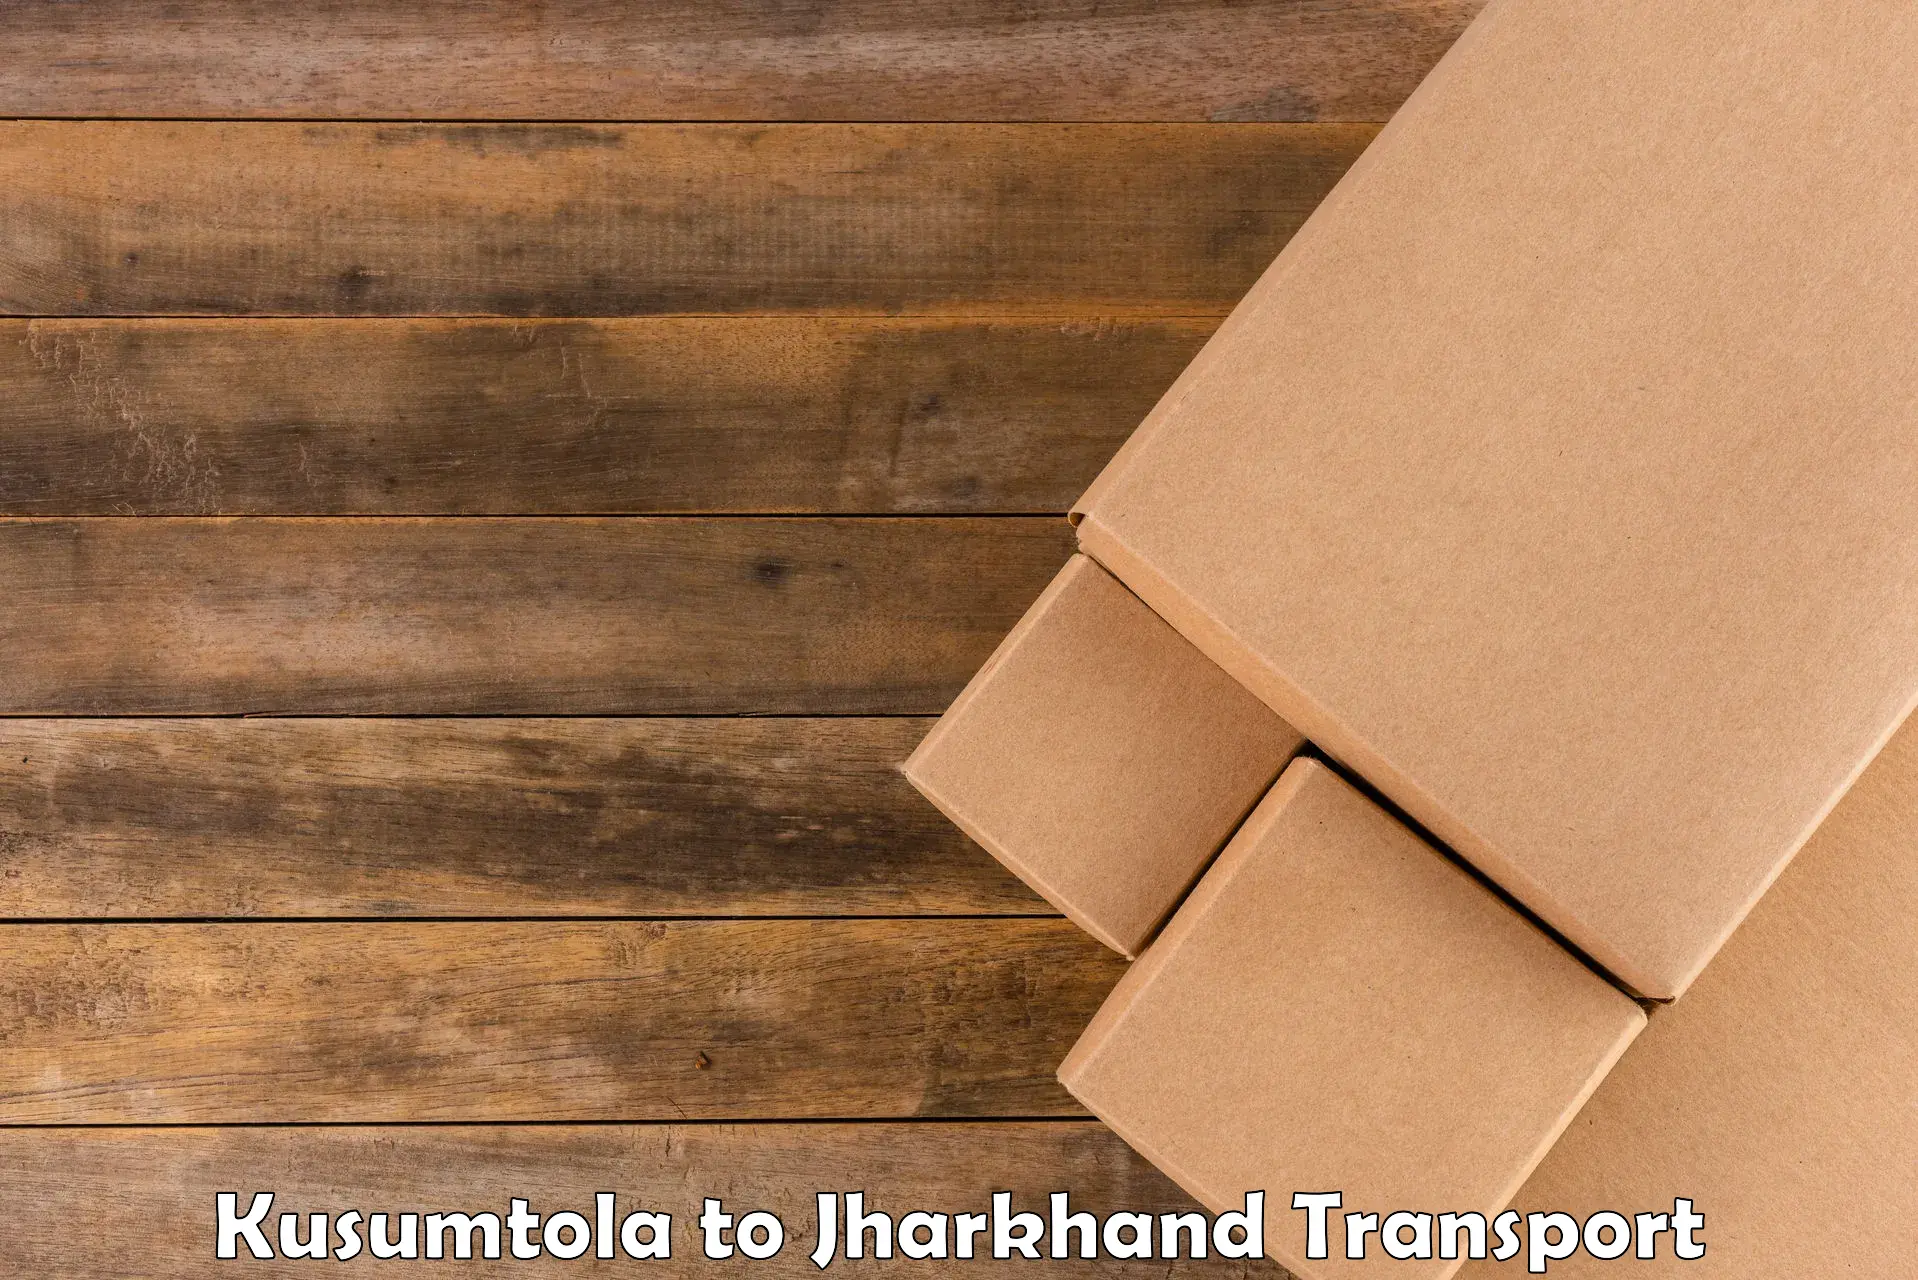 Daily parcel service transport in Kusumtola to Koderma